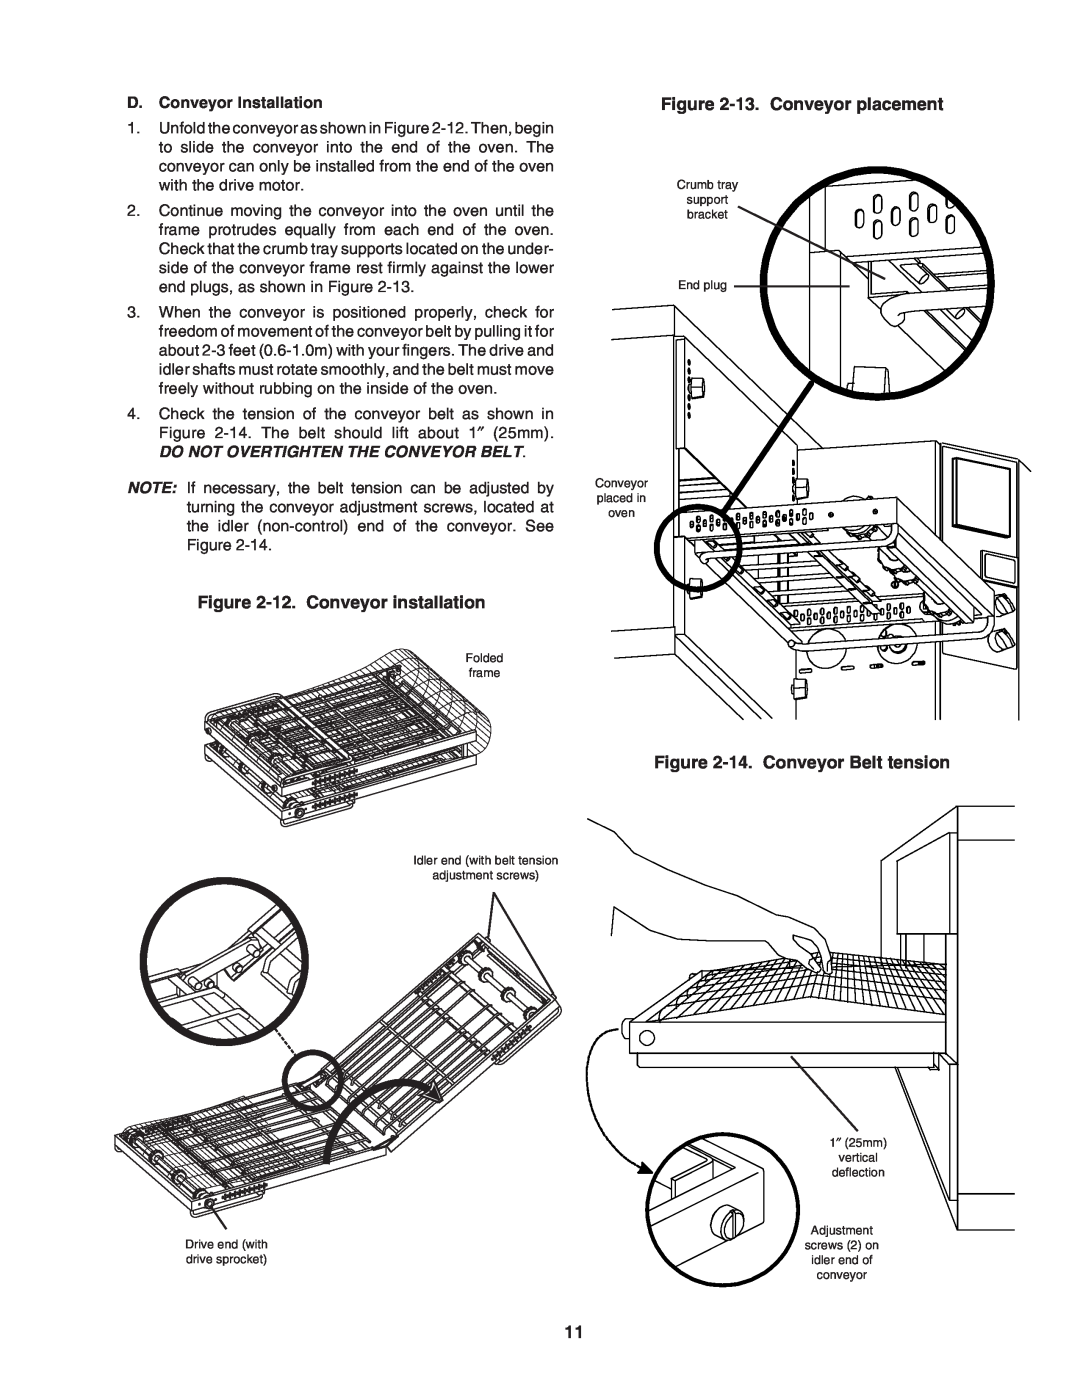 Middleby Marshall PS640E installation manual 12. Conveyor installation, 13. Conveyor placement, 14. Conveyor Belt tension 